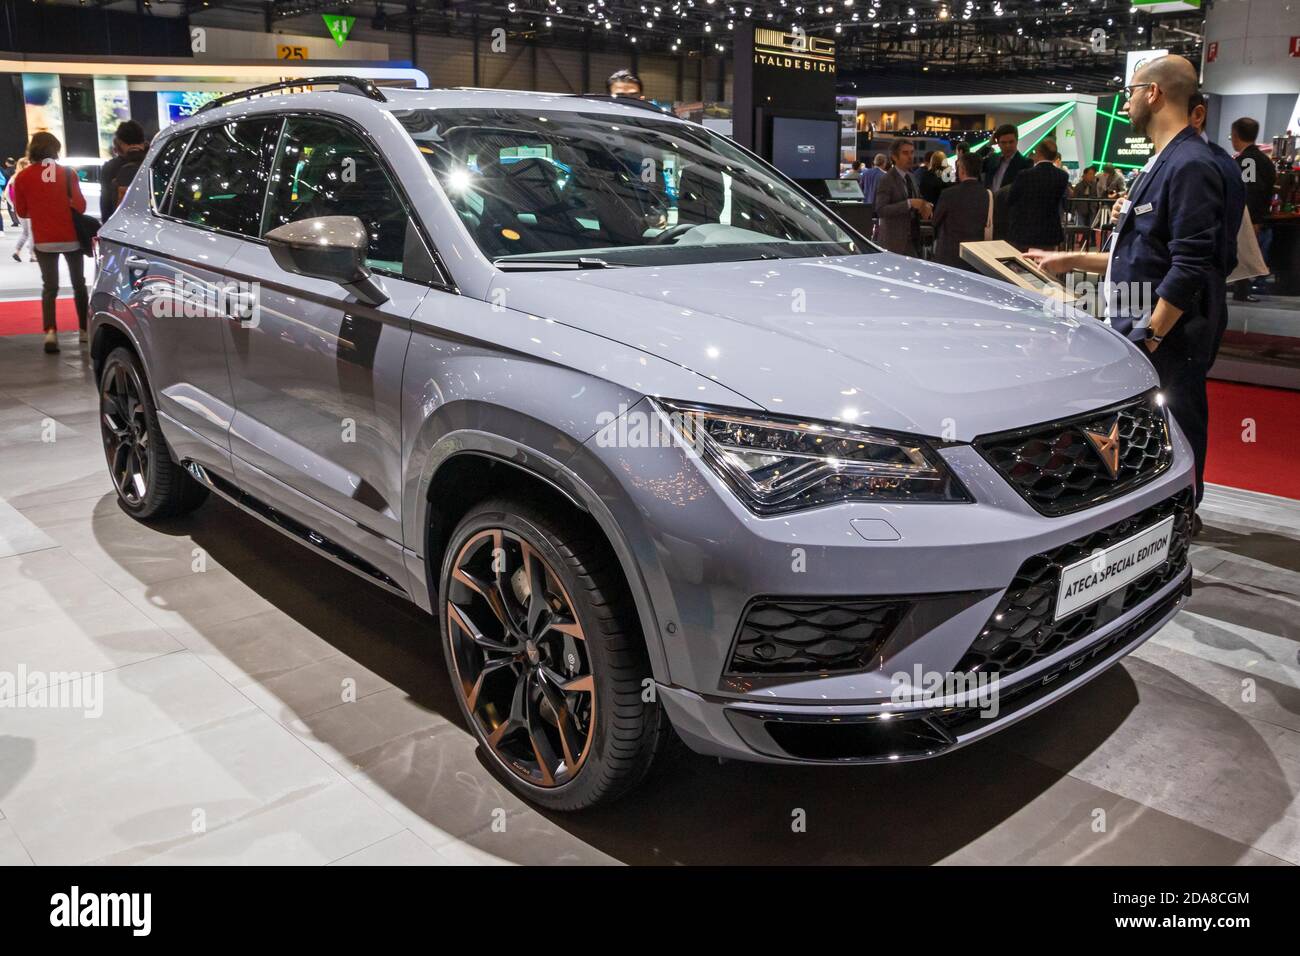 484 Seat Ateca Images, Stock Photos, 3D objects, & Vectors